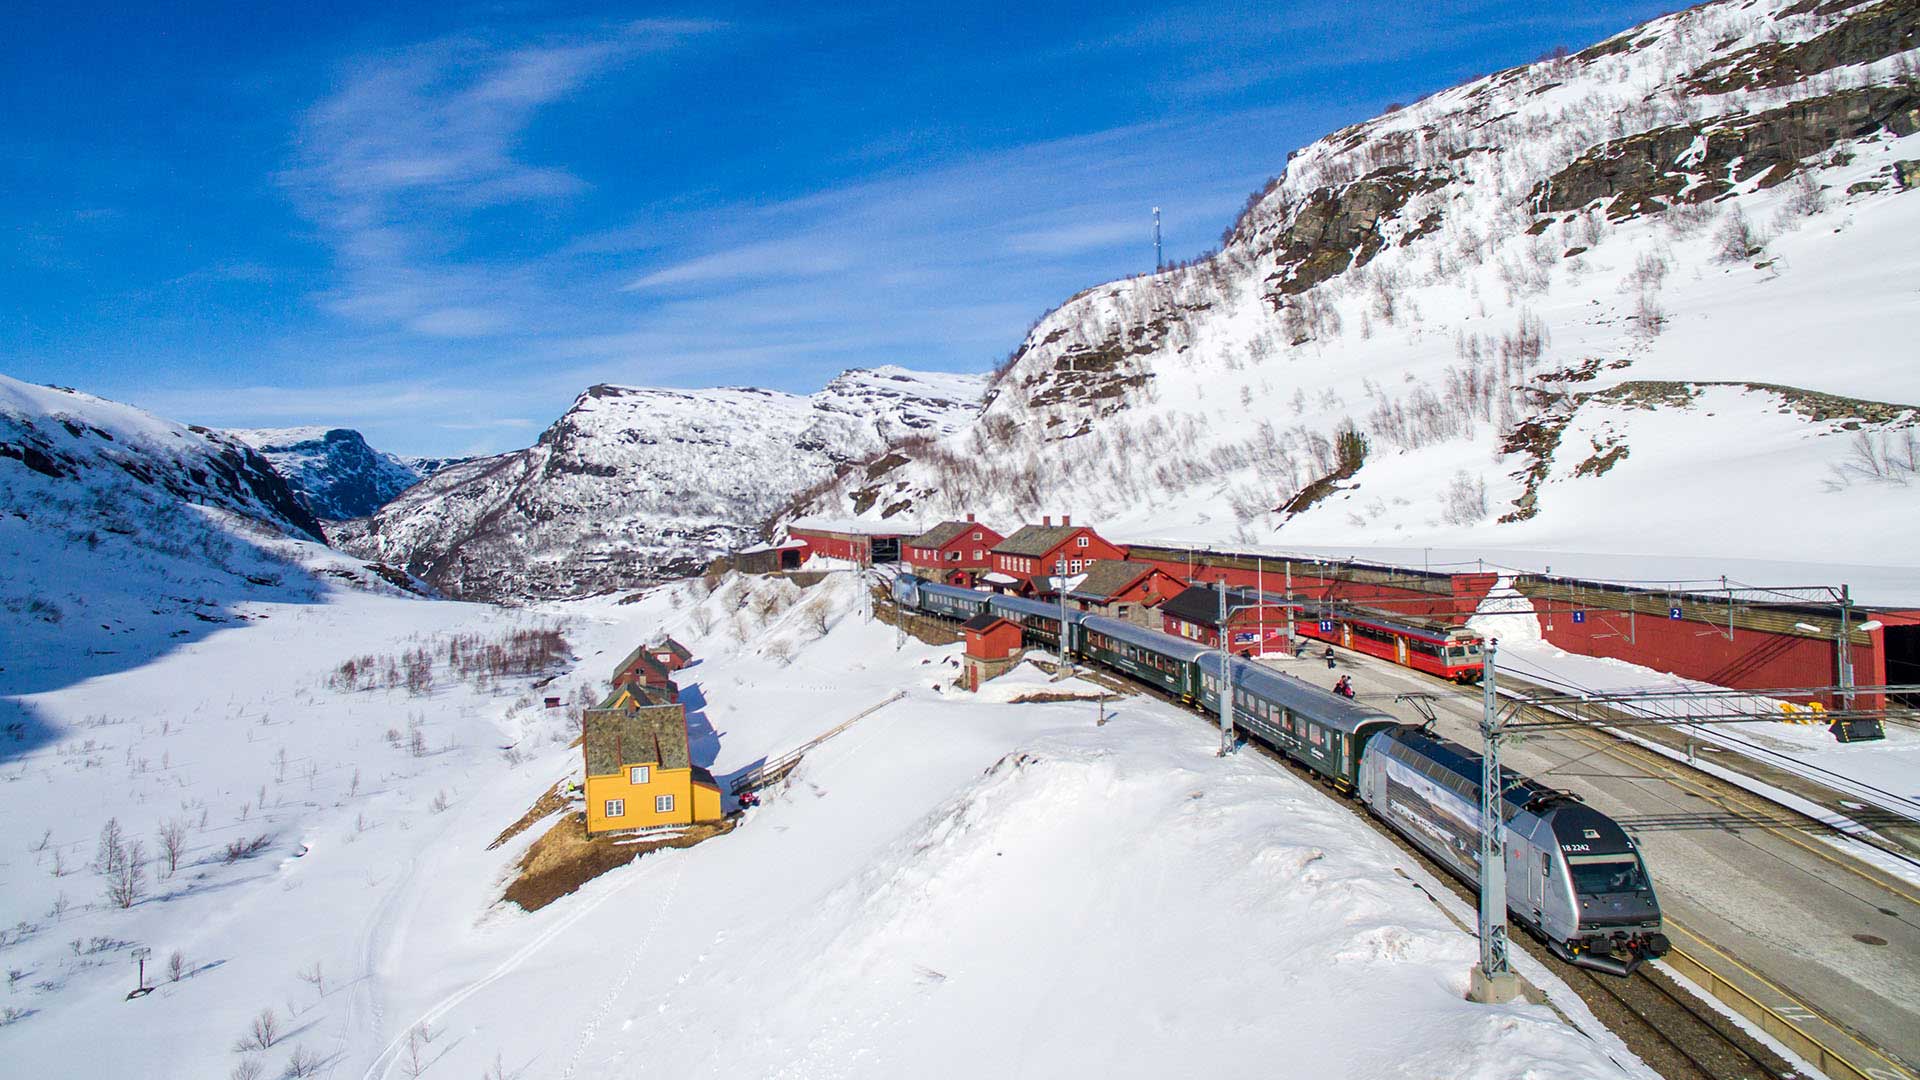 tour norway by train